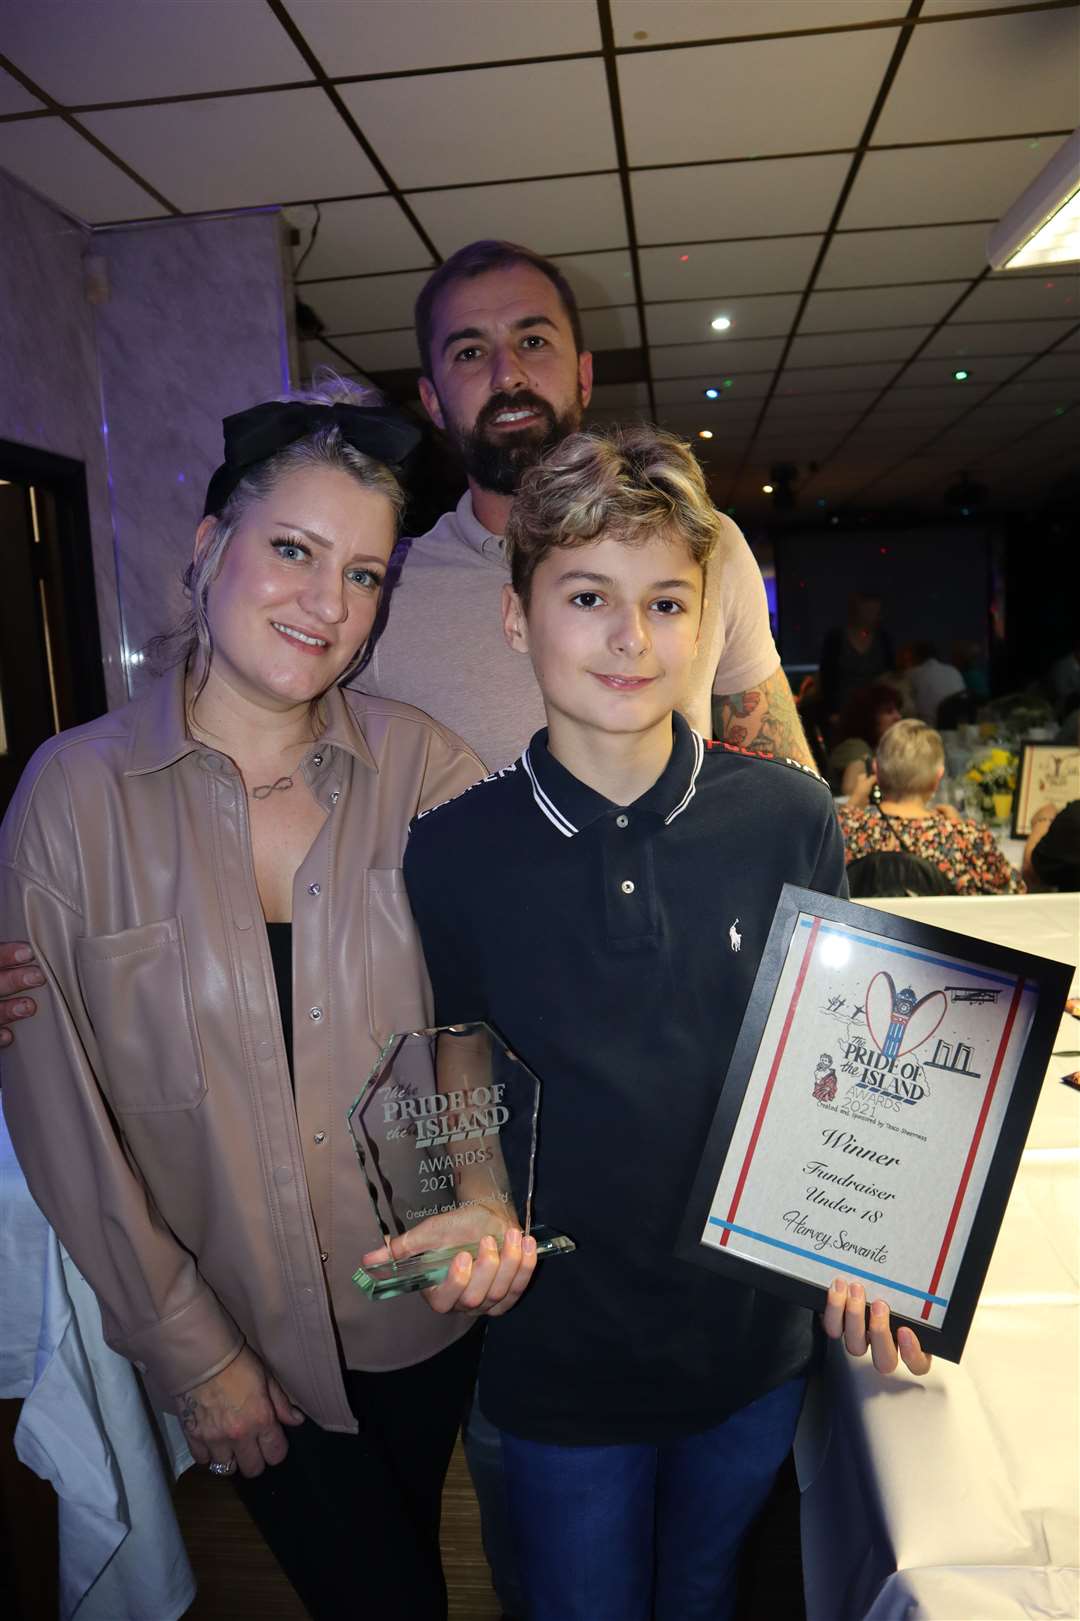 Harvey Servante, 12, pictured with his mum Gemma and dad Daniel, was named under-18 fundraiser of the year with Joshua Jarvis in the Tesco Pride of the Island awards